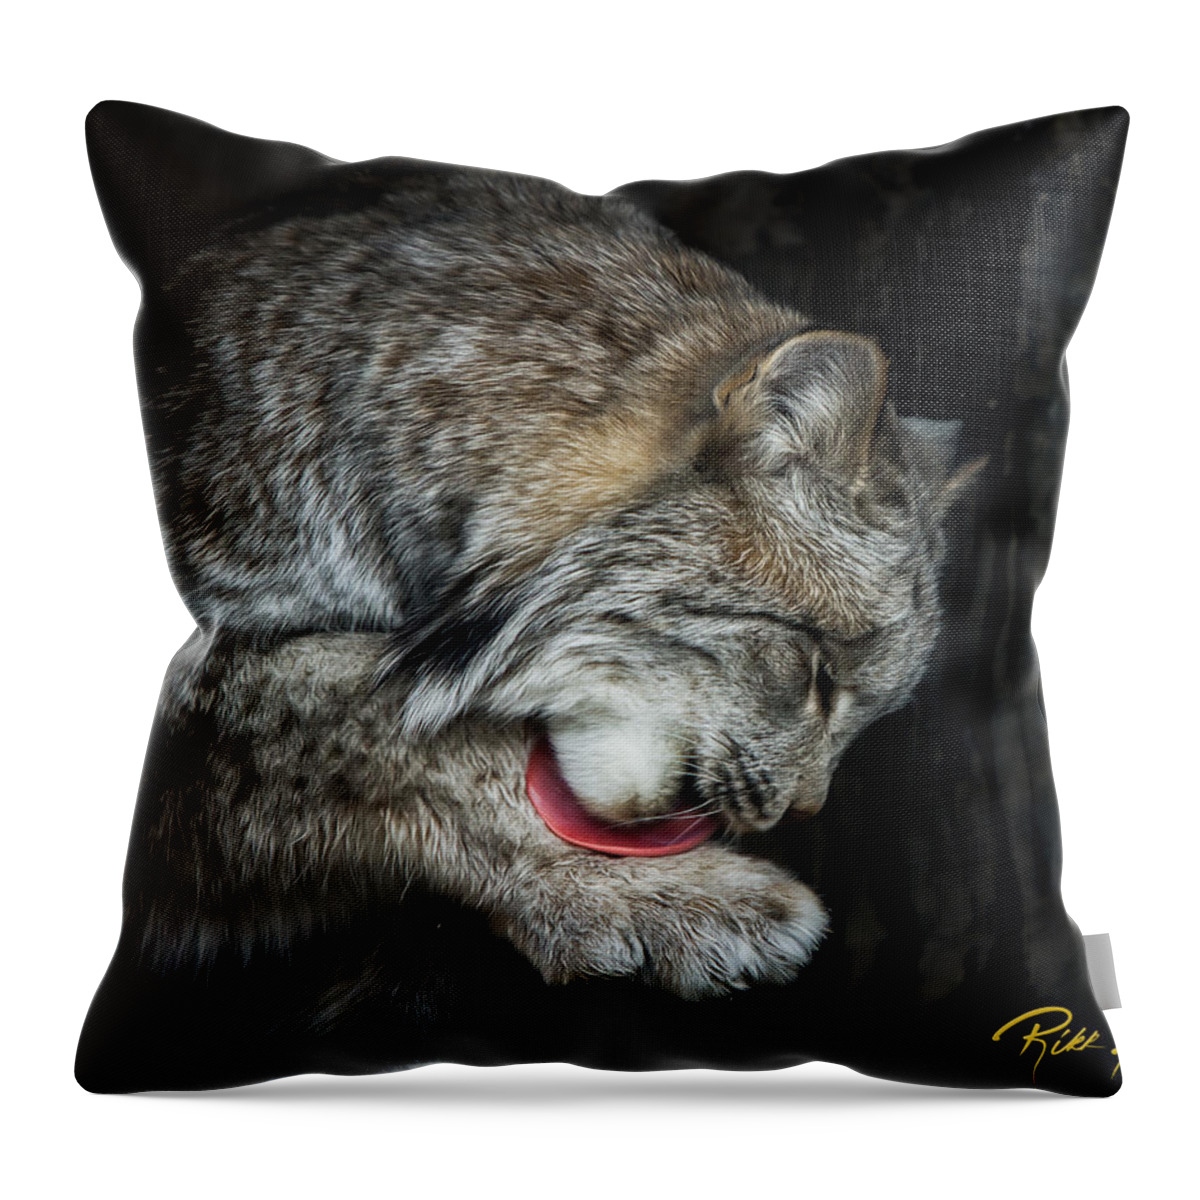 Animals Throw Pillow featuring the photograph Grooming Lynx by Rikk Flohr